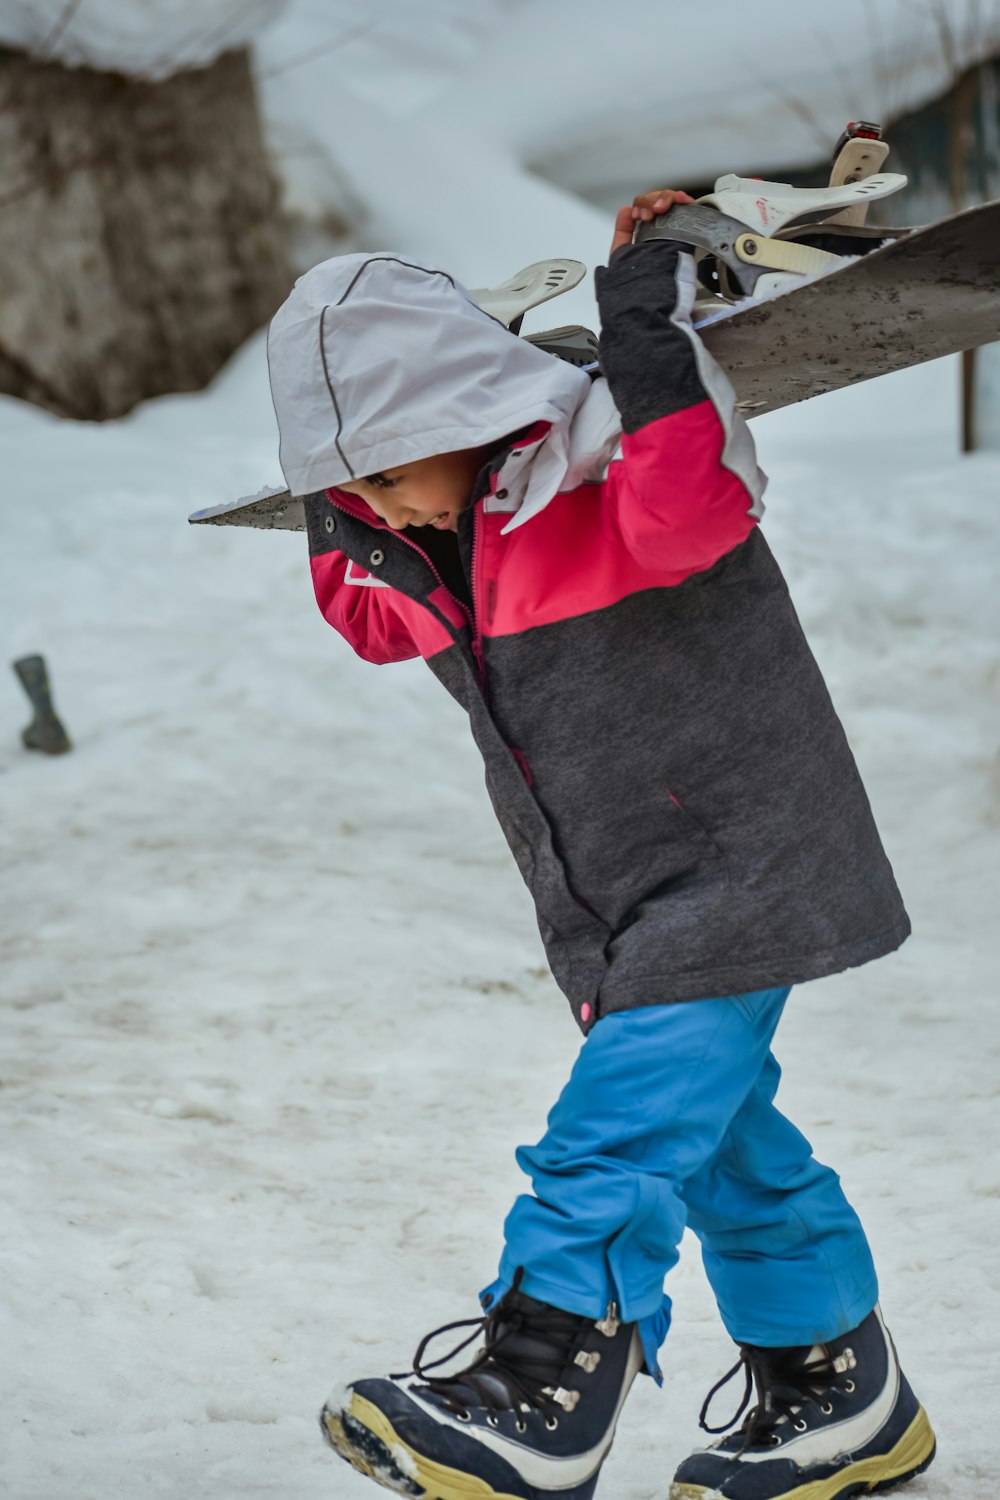 a young child holding a snowboard on top of a snow covered ground